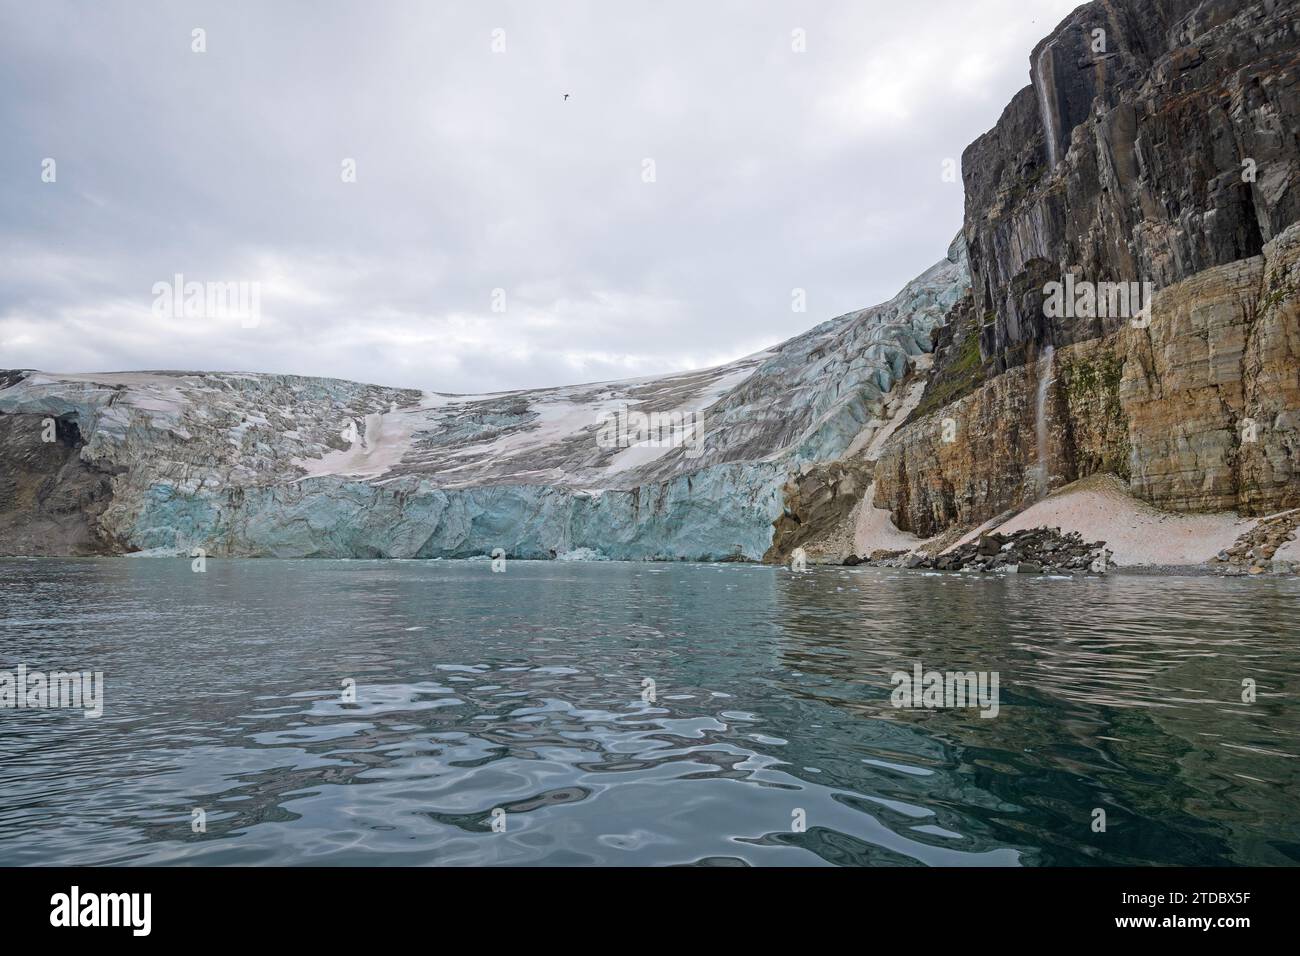 Massive Glacier Flowing Down to the Sea at Alkefjellet in the Hinlopen Strait in the Svalbard Islands Stock Photo